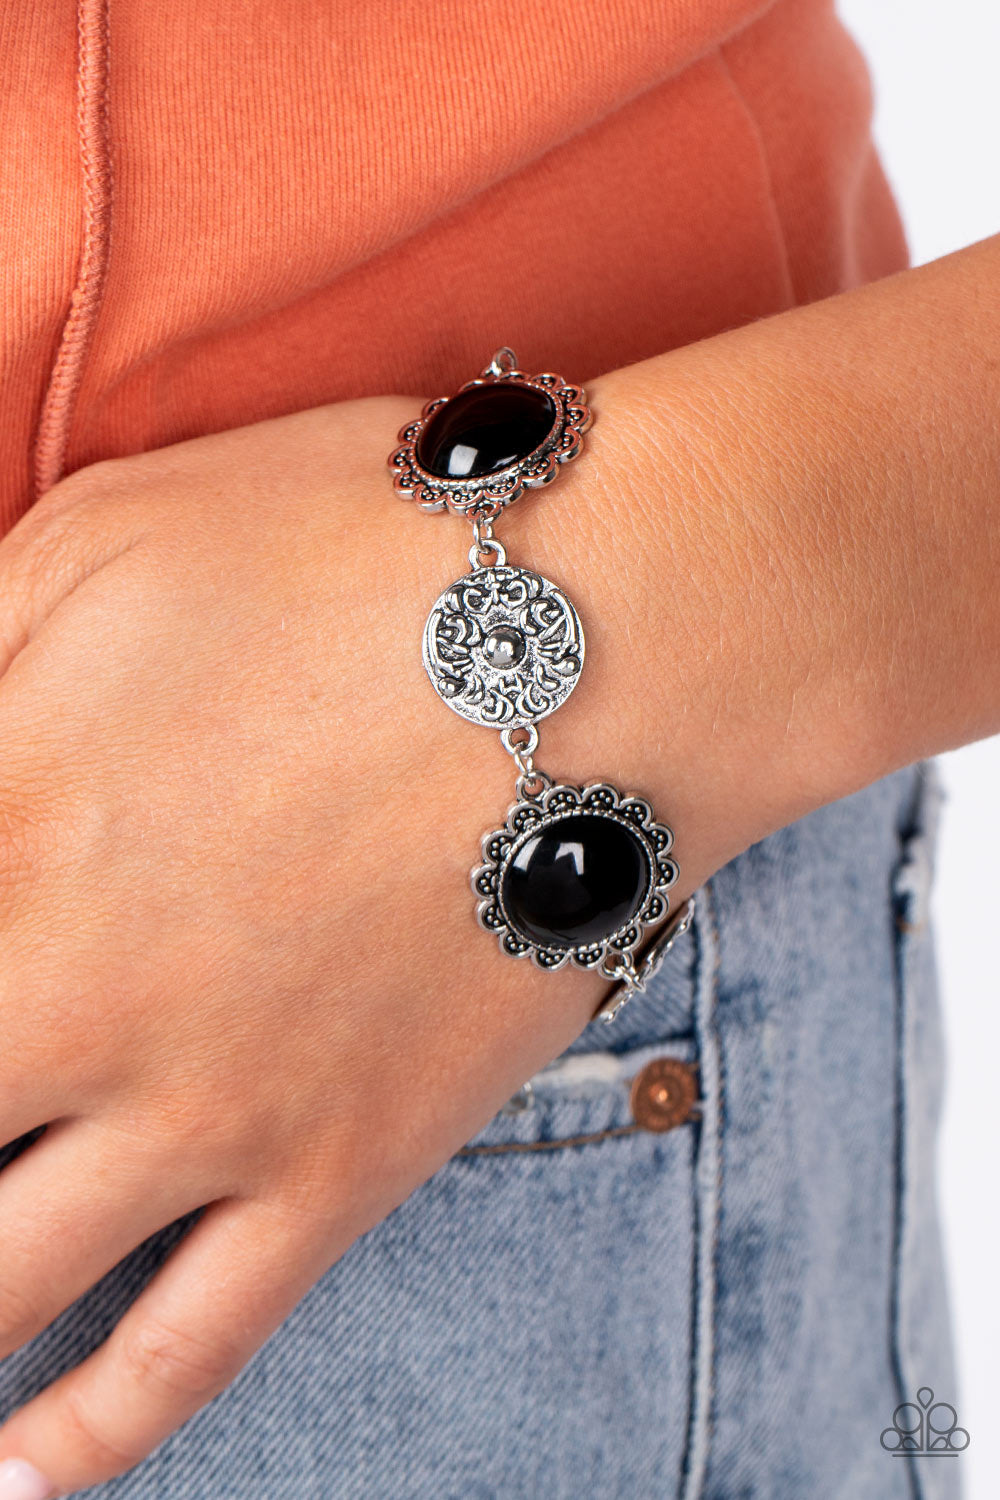 Positively Poppy - Black Bracelet - Paparazzi Accessories - Shiny oversized black beads are wrapped in floral-inspired frames of silver, filled with studded texture. Silver discs embossed in a filigree motif alternate with the vibrant beads as they link around the wrist in a whimsical finish.